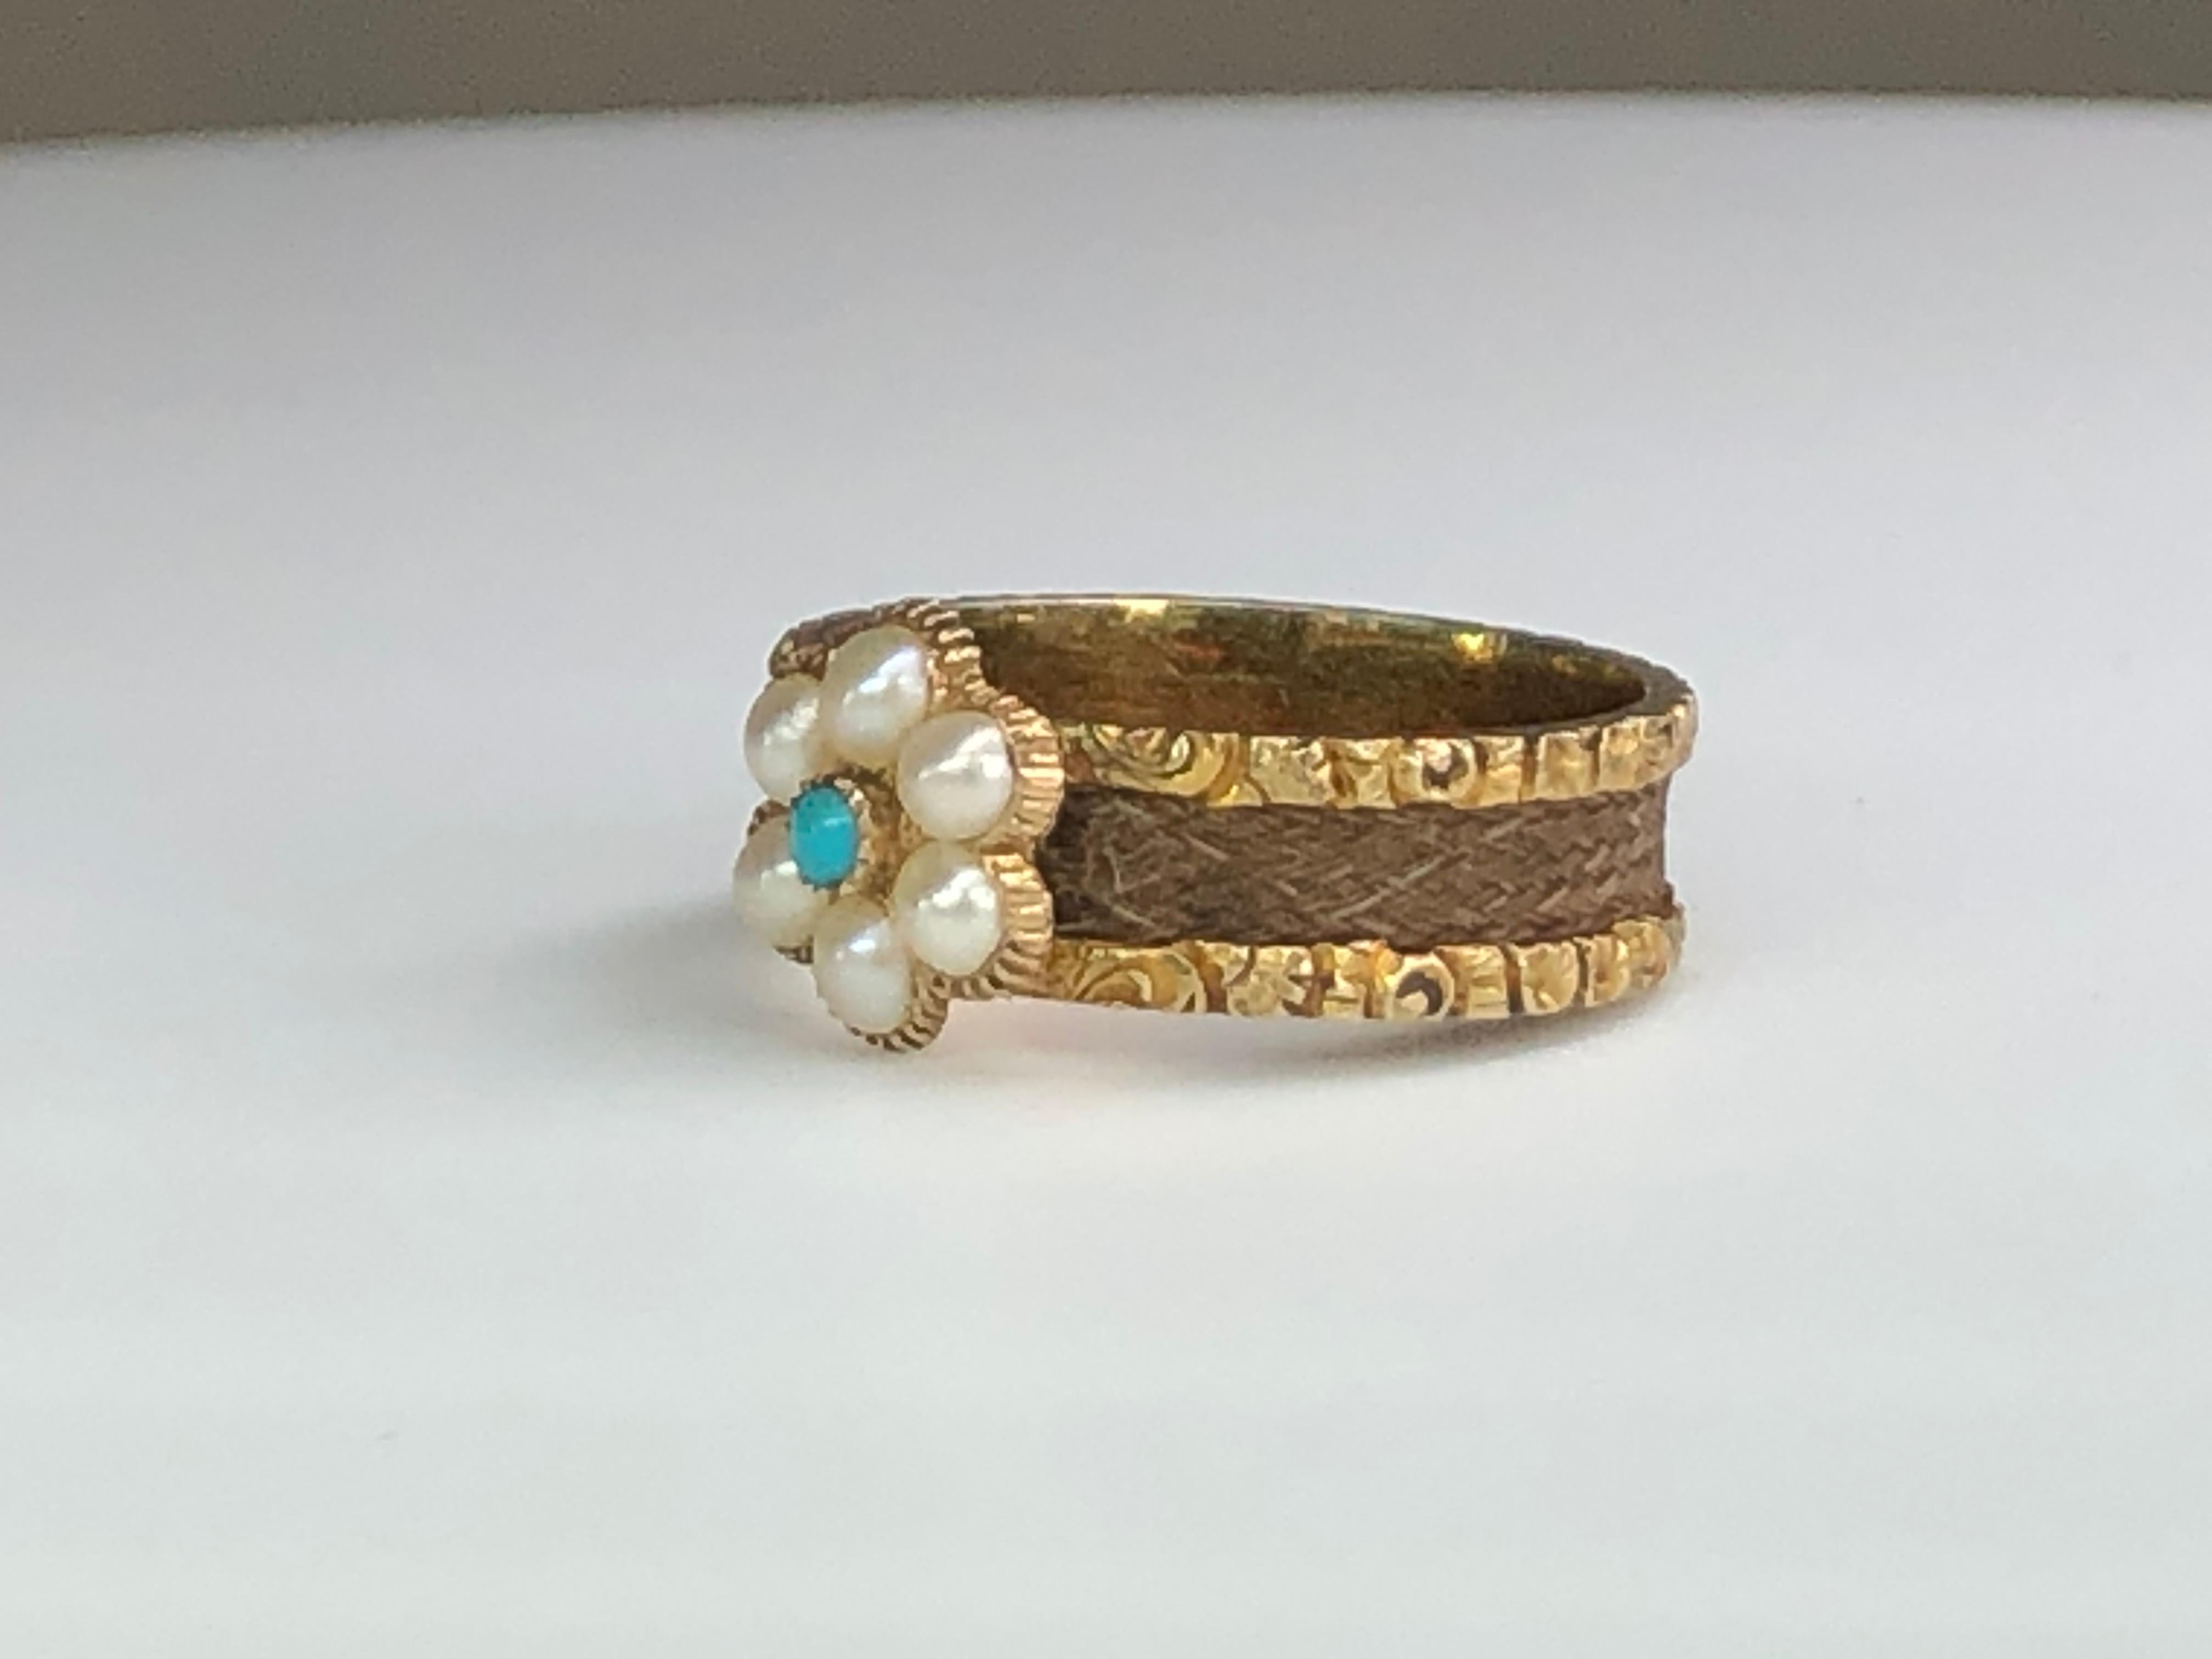 This Victorian Pearl & turquoise cluster ring is truly a sight to behold!  We love the daisy flower design with the beautifully engraved gold shoulders.  Such an elegant piece, this ring exudes charm and class on all occasions.

This ring is a